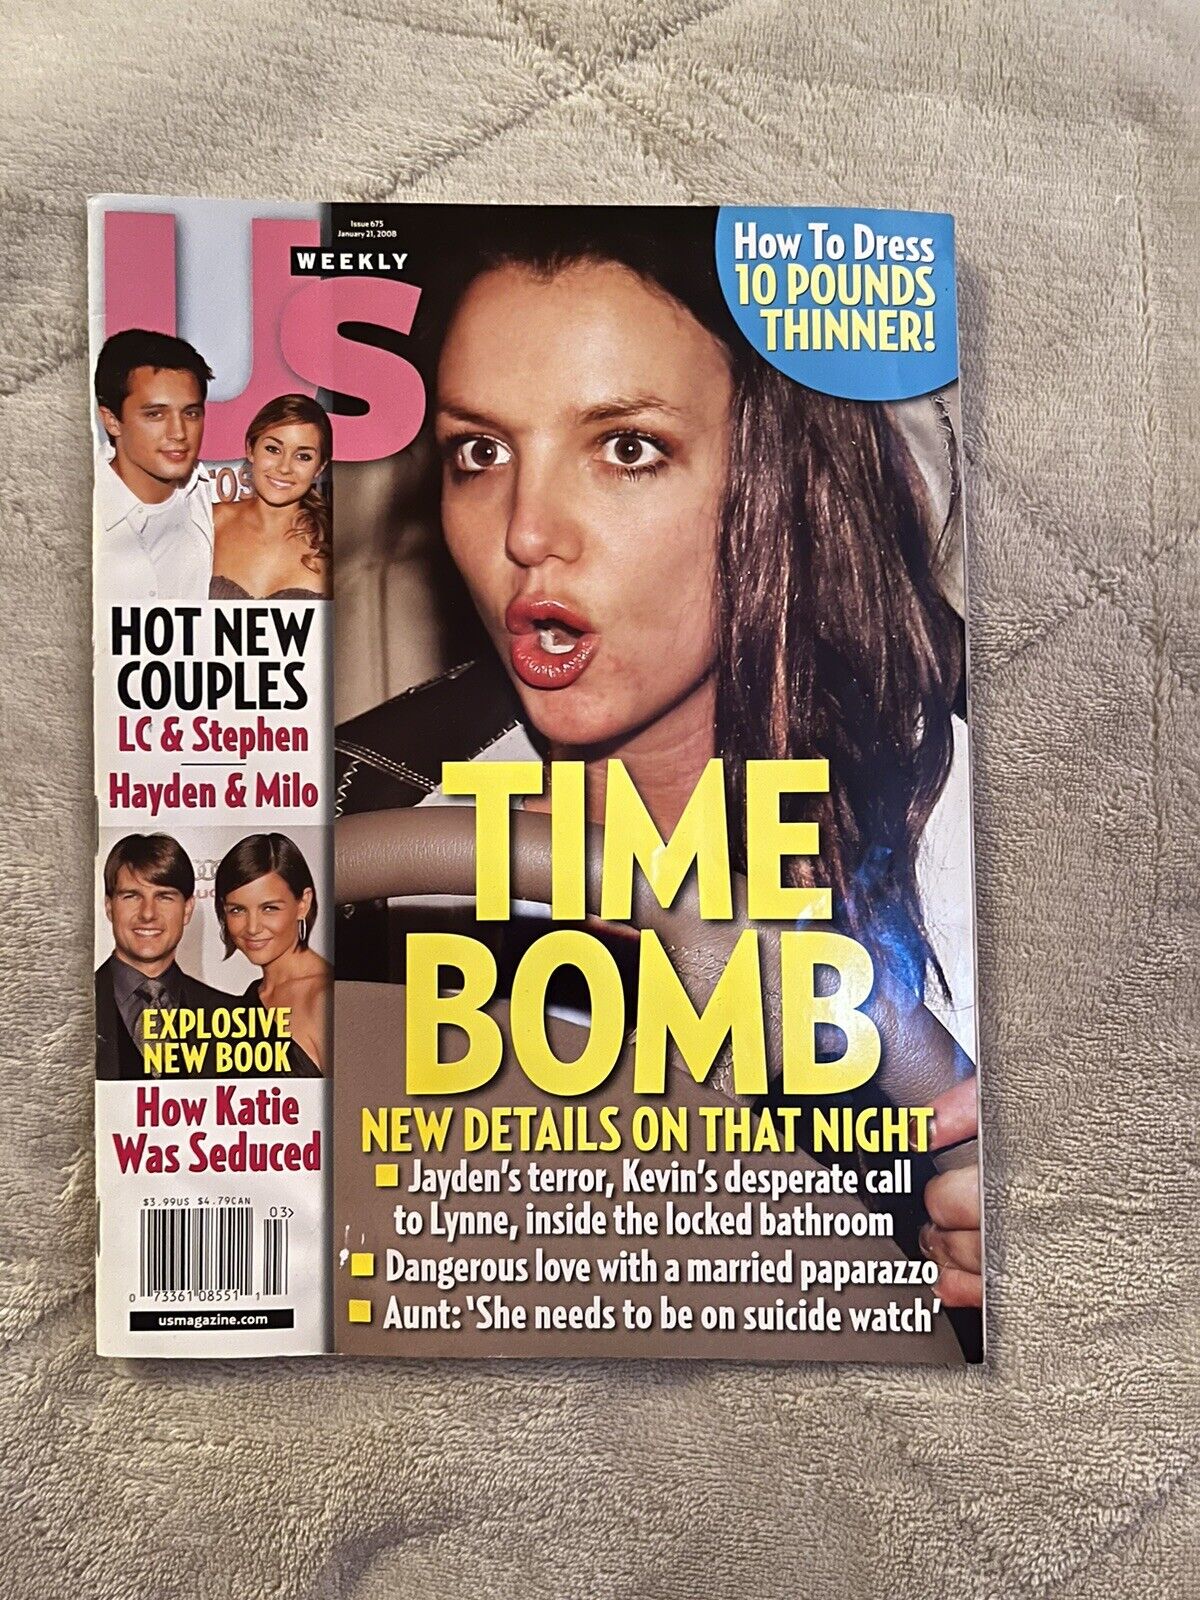 US Weekly January 21, 2008 “Time Bomb” Britney Spears